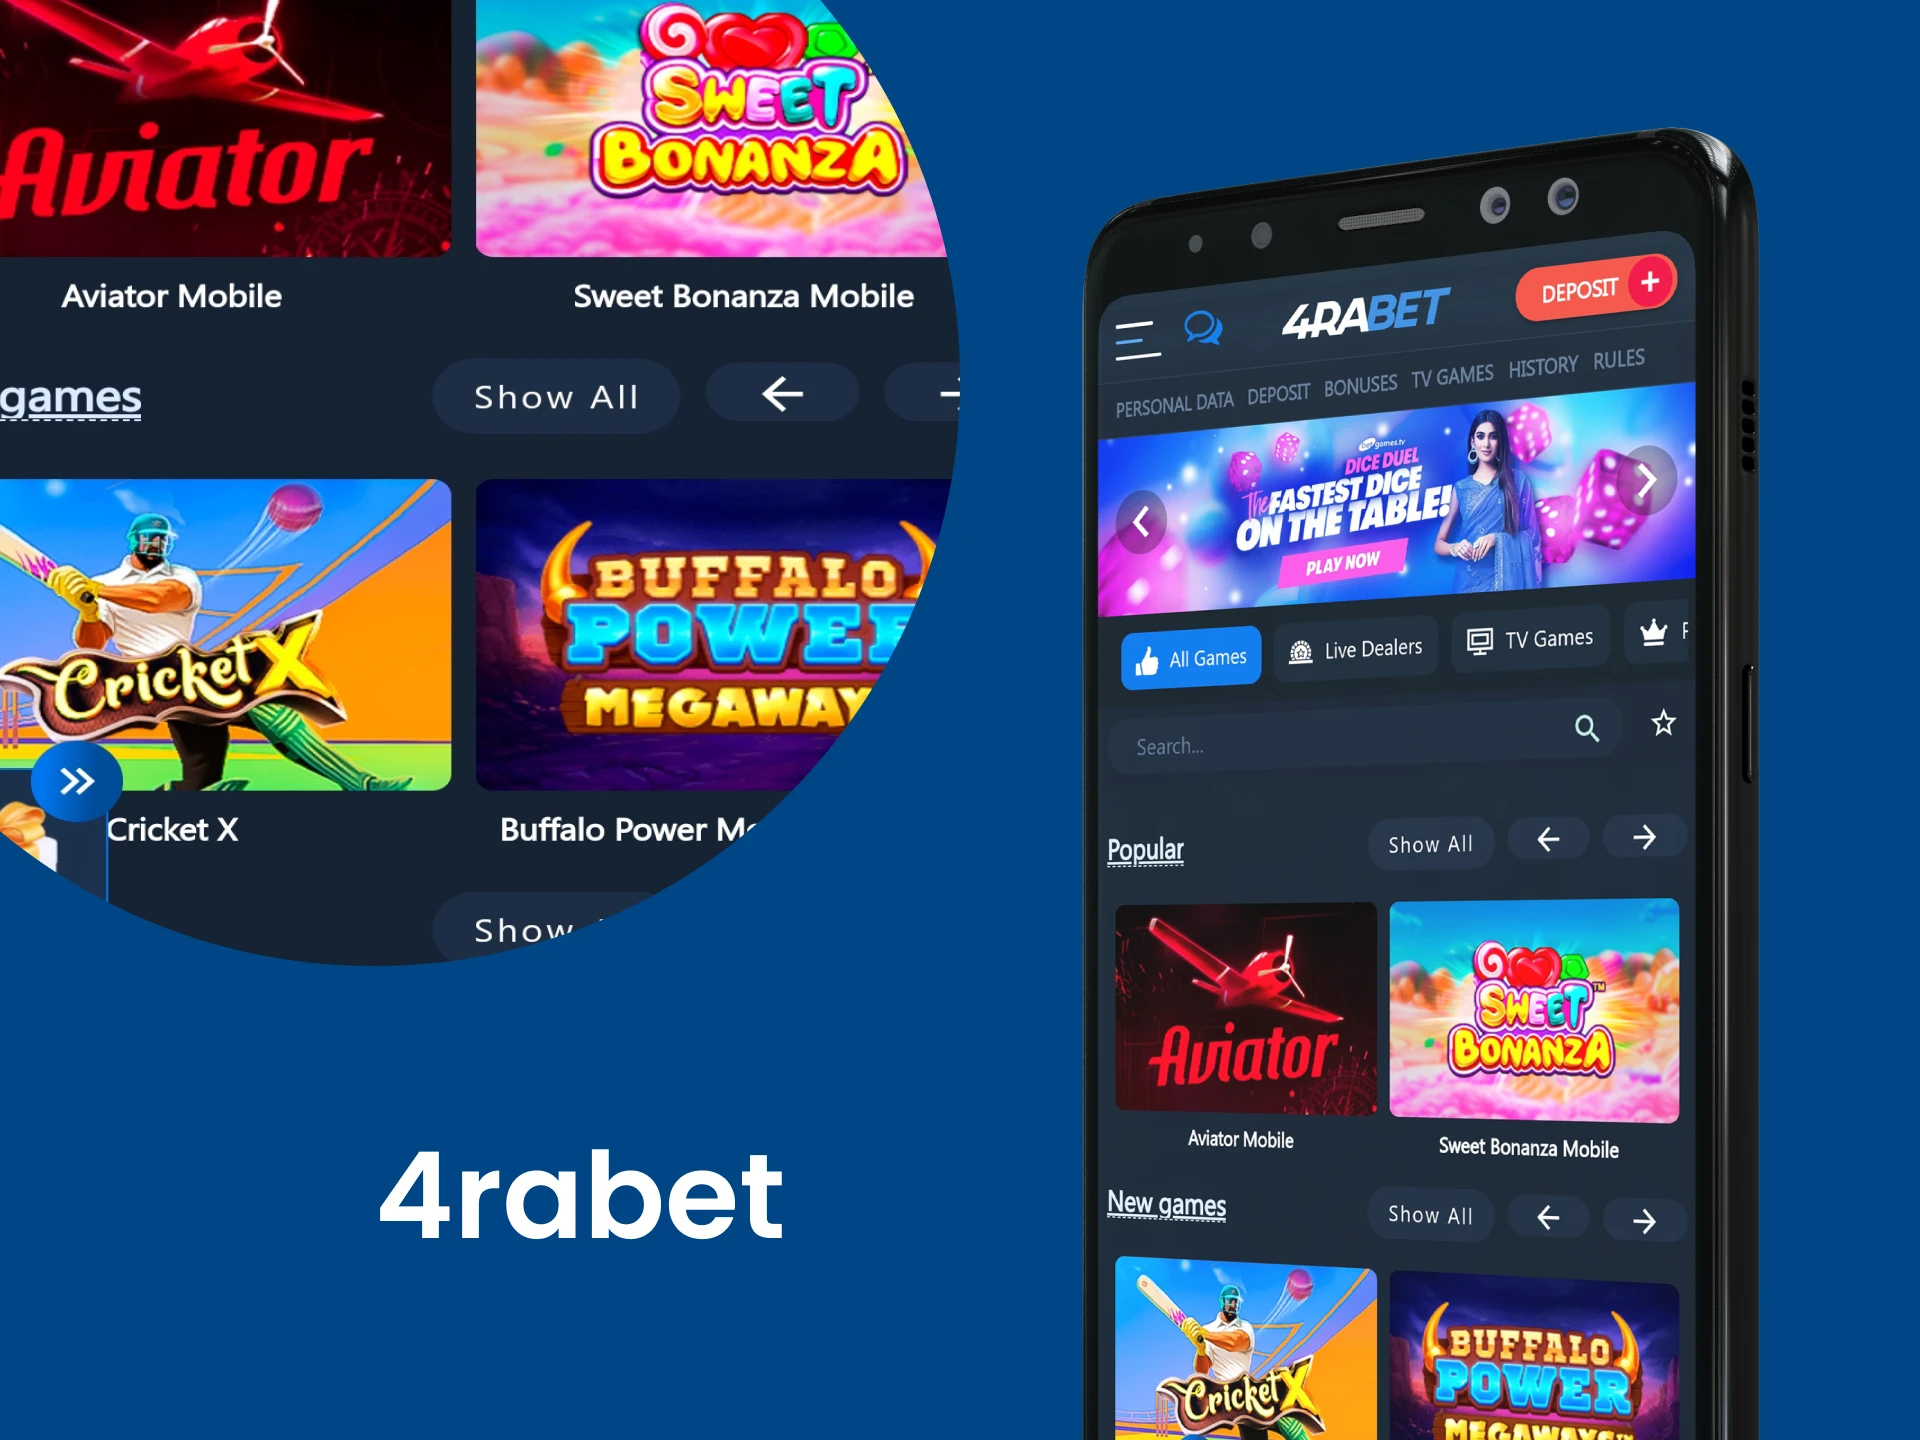 Download the 4rabet app for casino games.